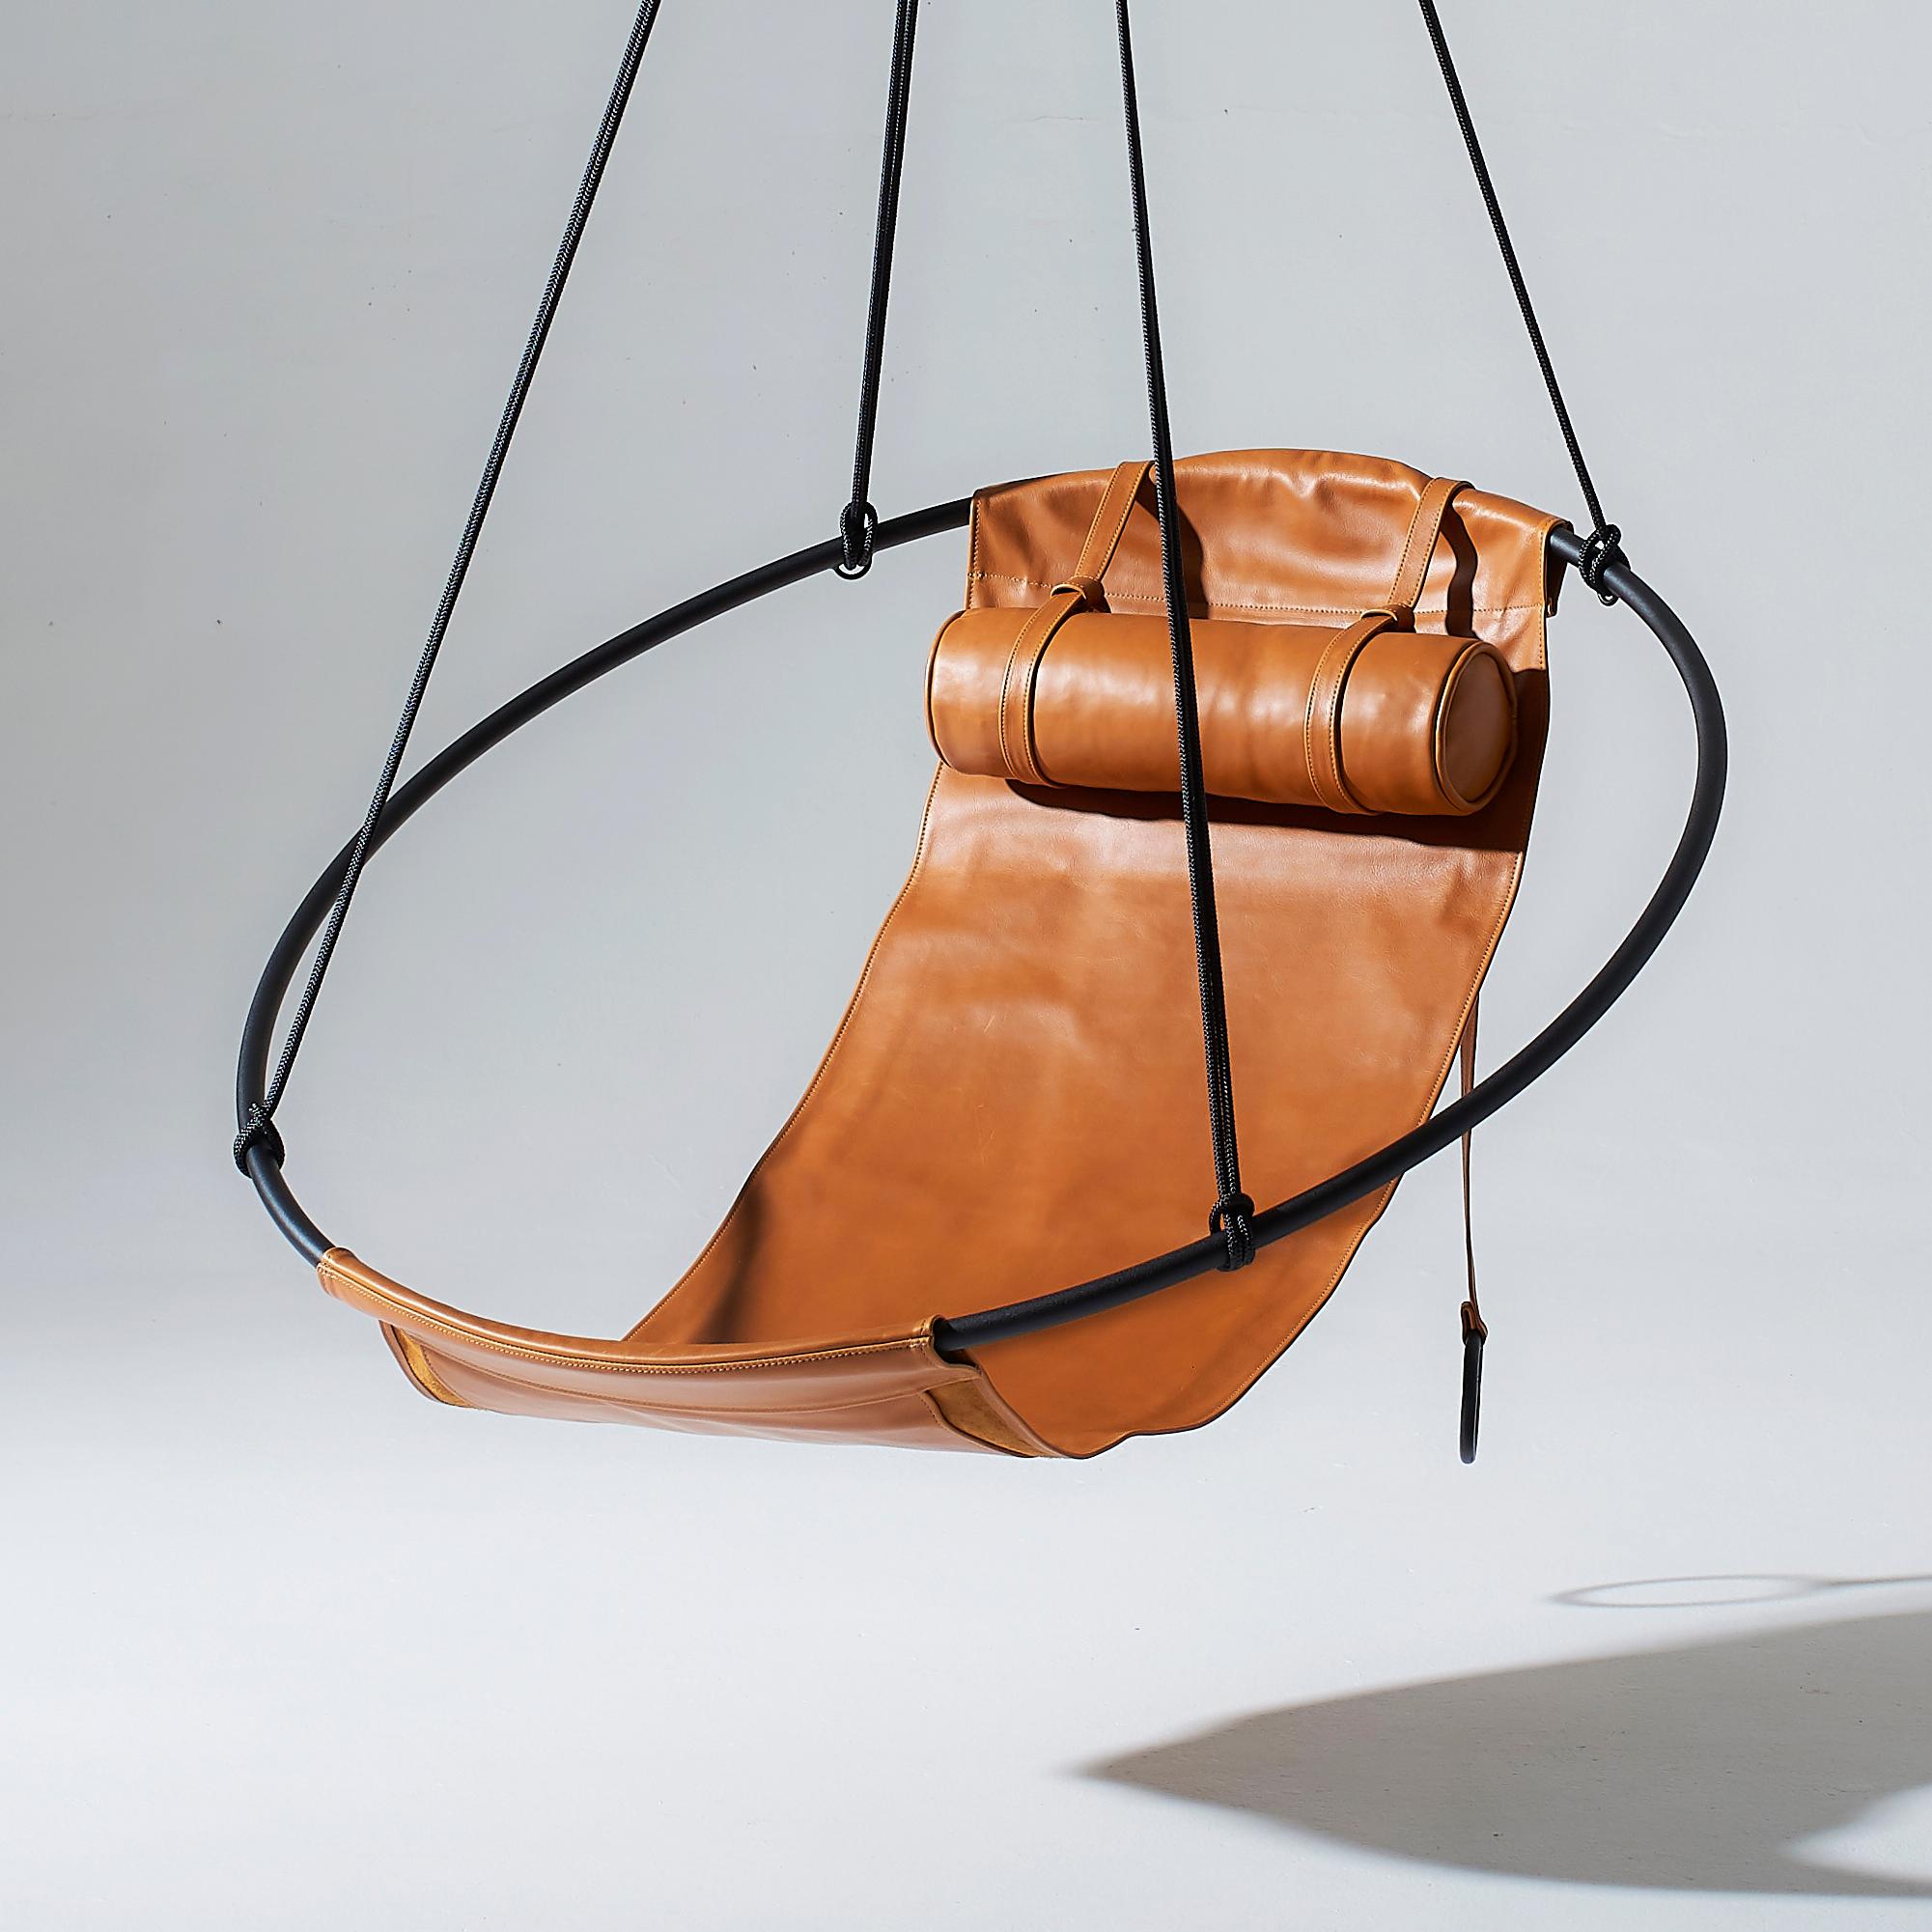 21st-Century Modern Contemporary Genuine Leather Suspended/Hanging Sling Chair in Brown Ochre by Studio Stirling.